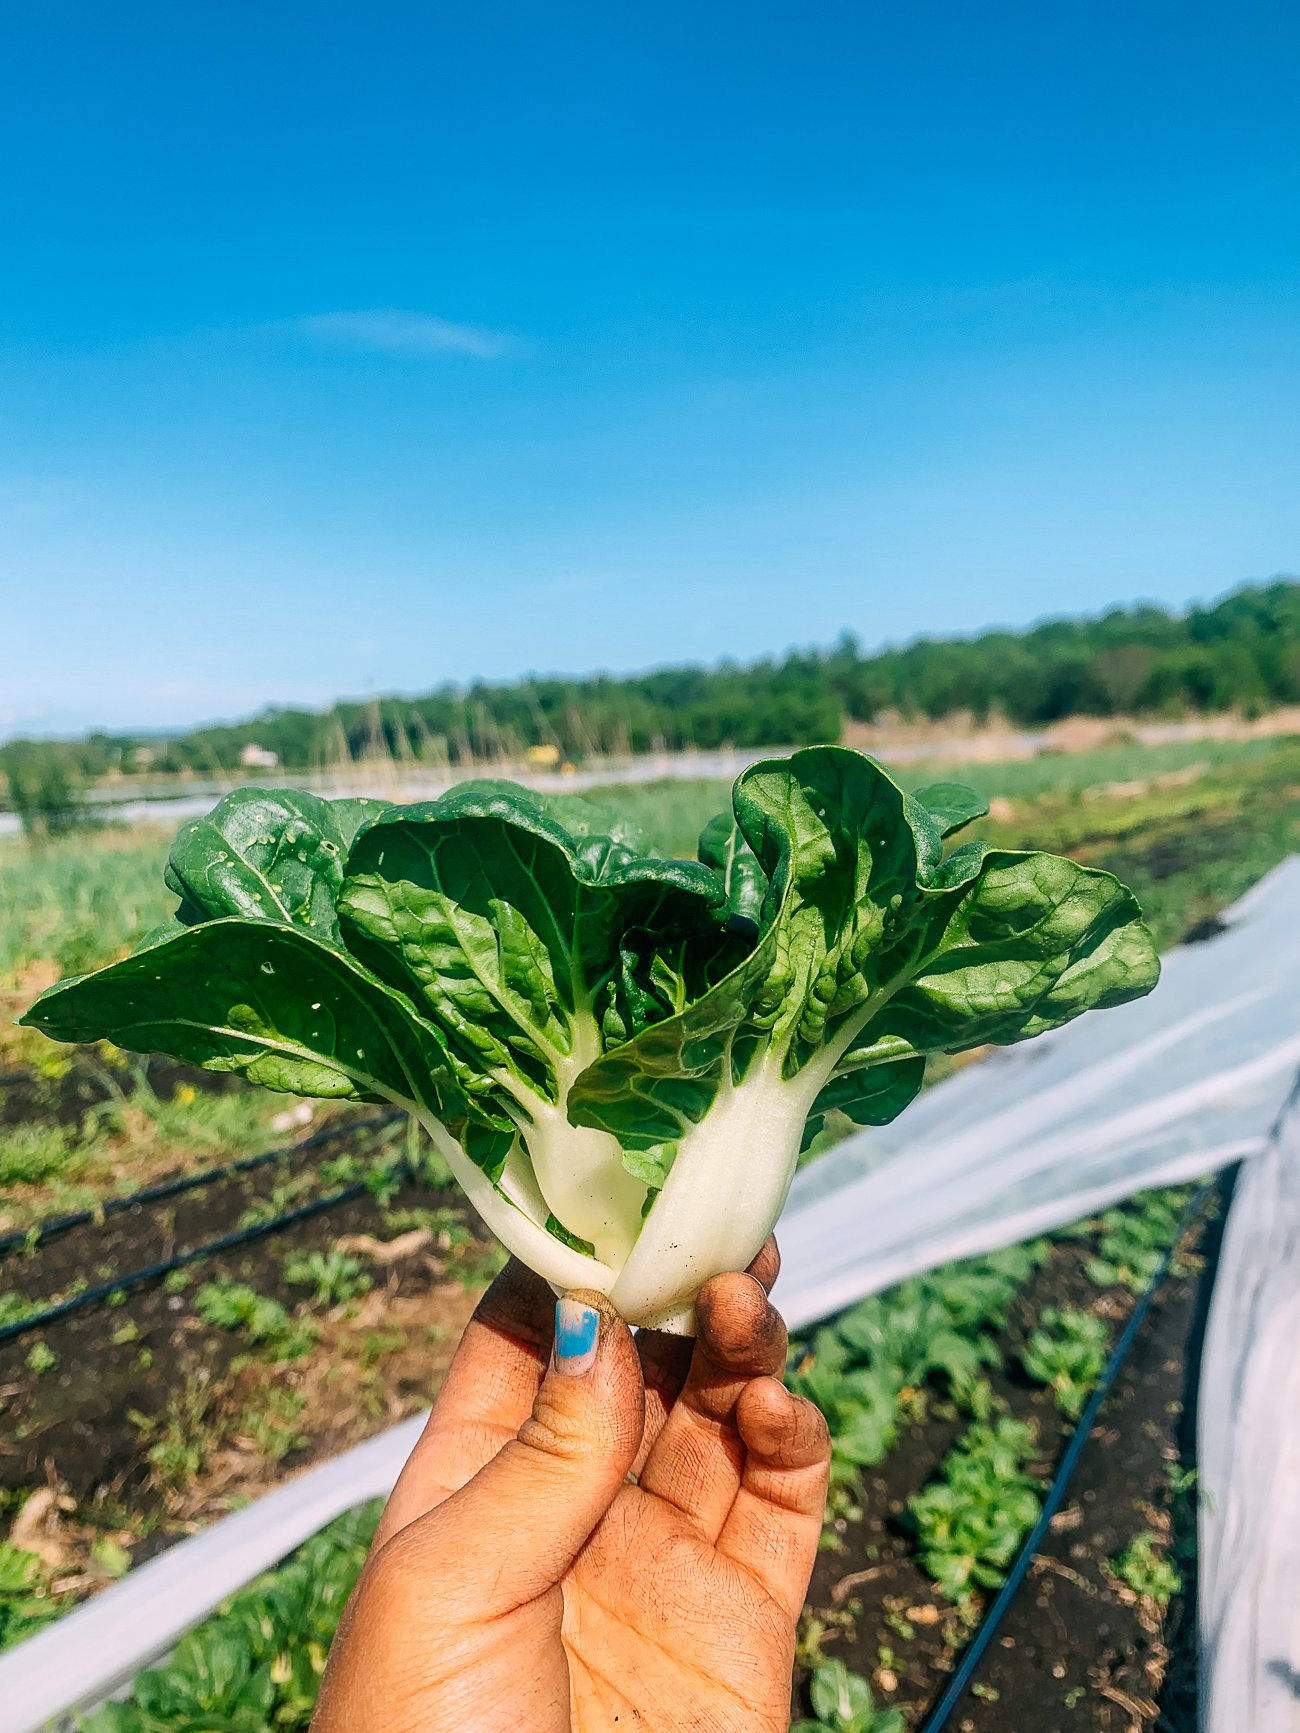 dwarf bok choy with white stems and curly dark green leaves